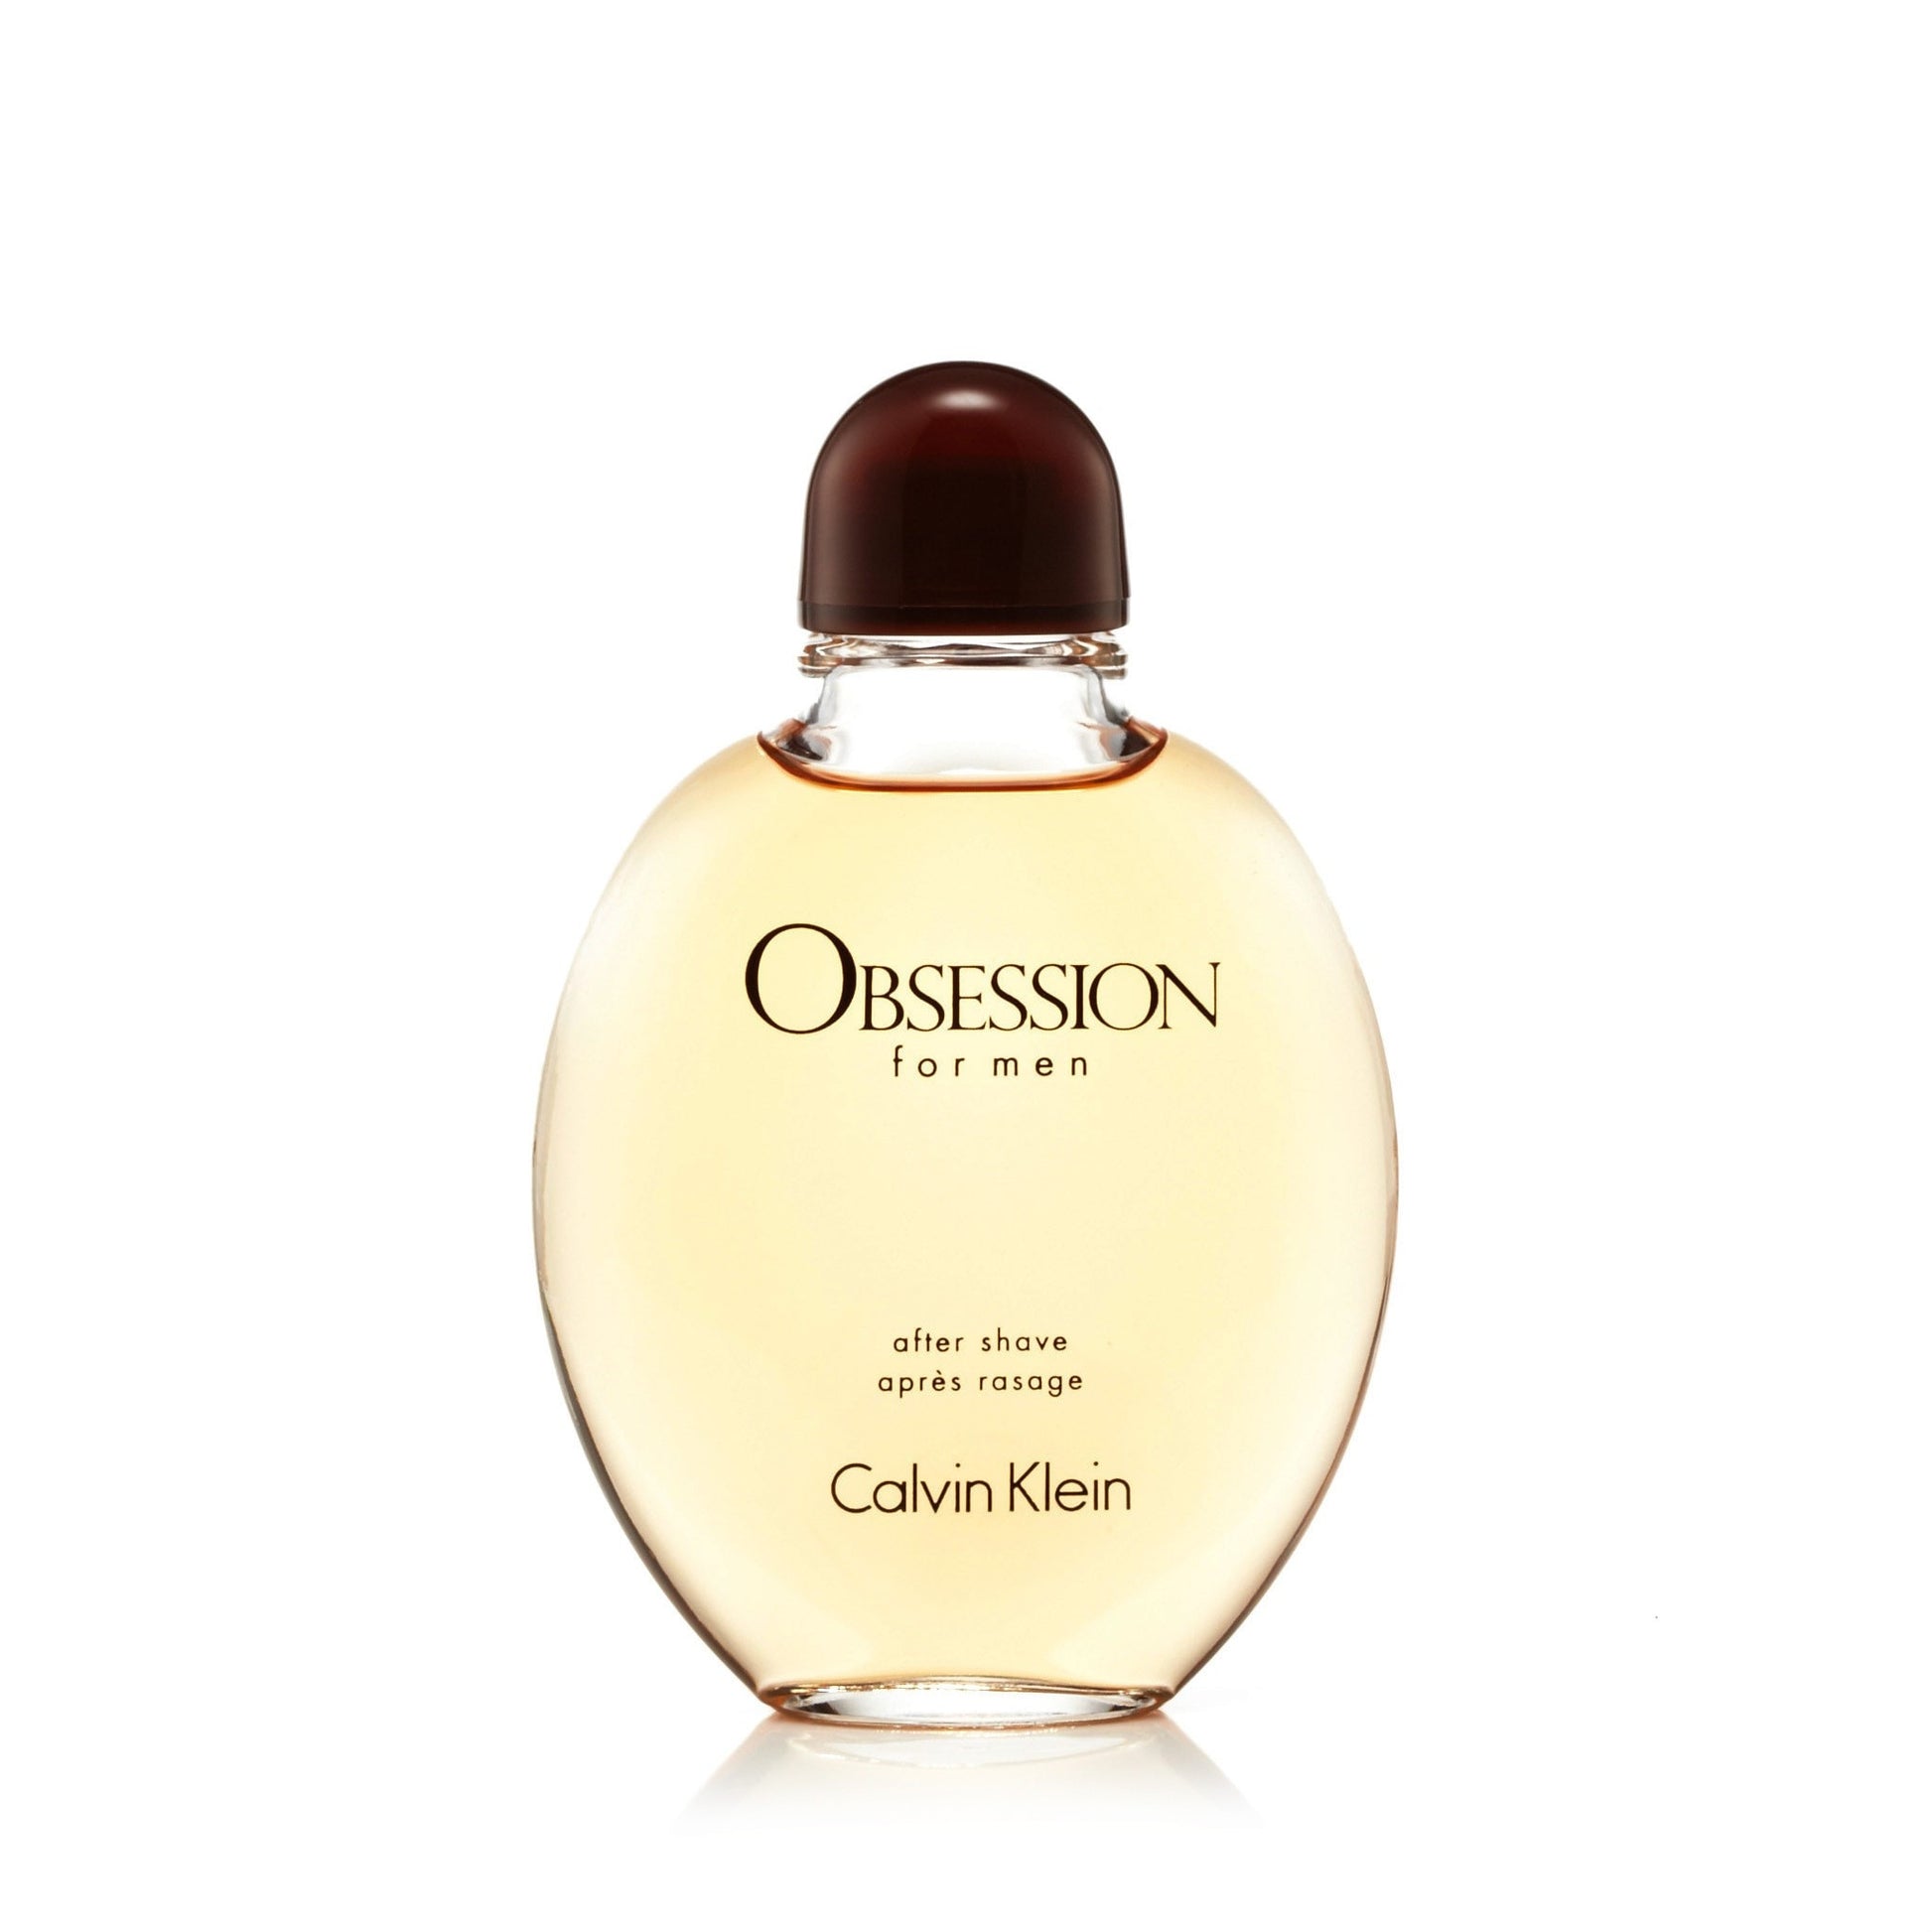 Obsession After Shave for Men by Calvin Klein 4.0 oz. Click to open in modal